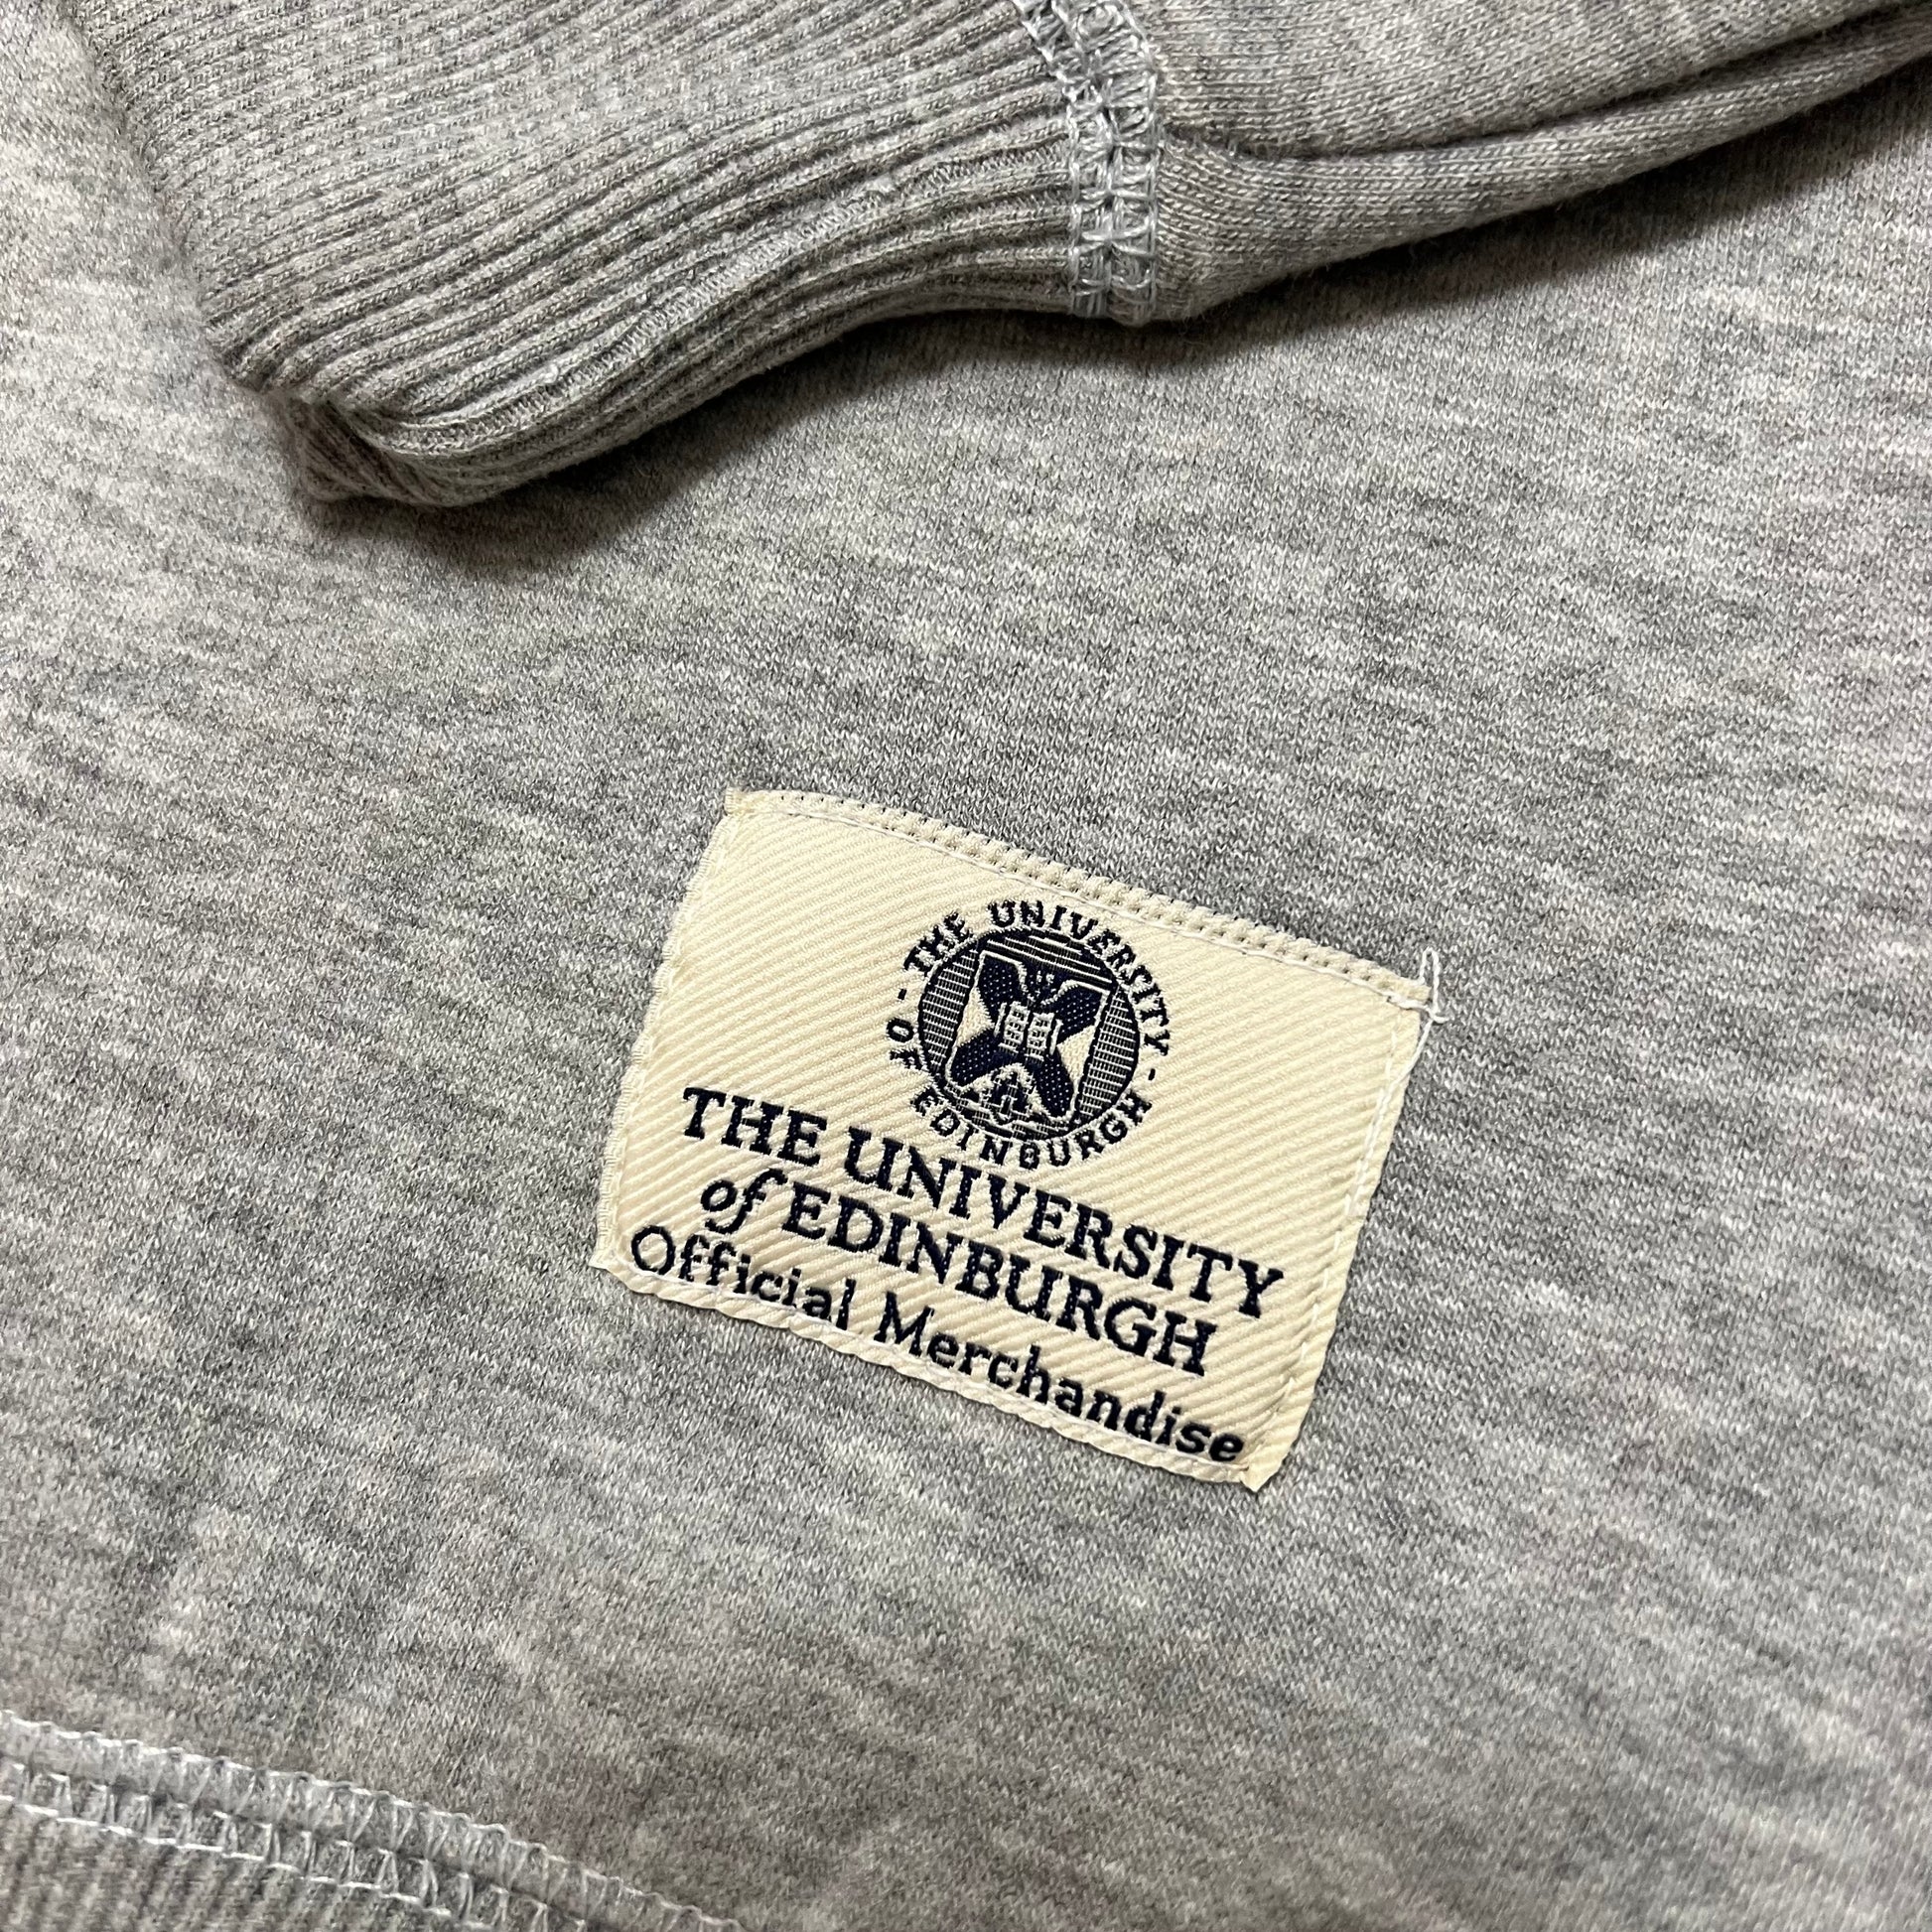 close-up of the university of edinburgh official merchandise tag